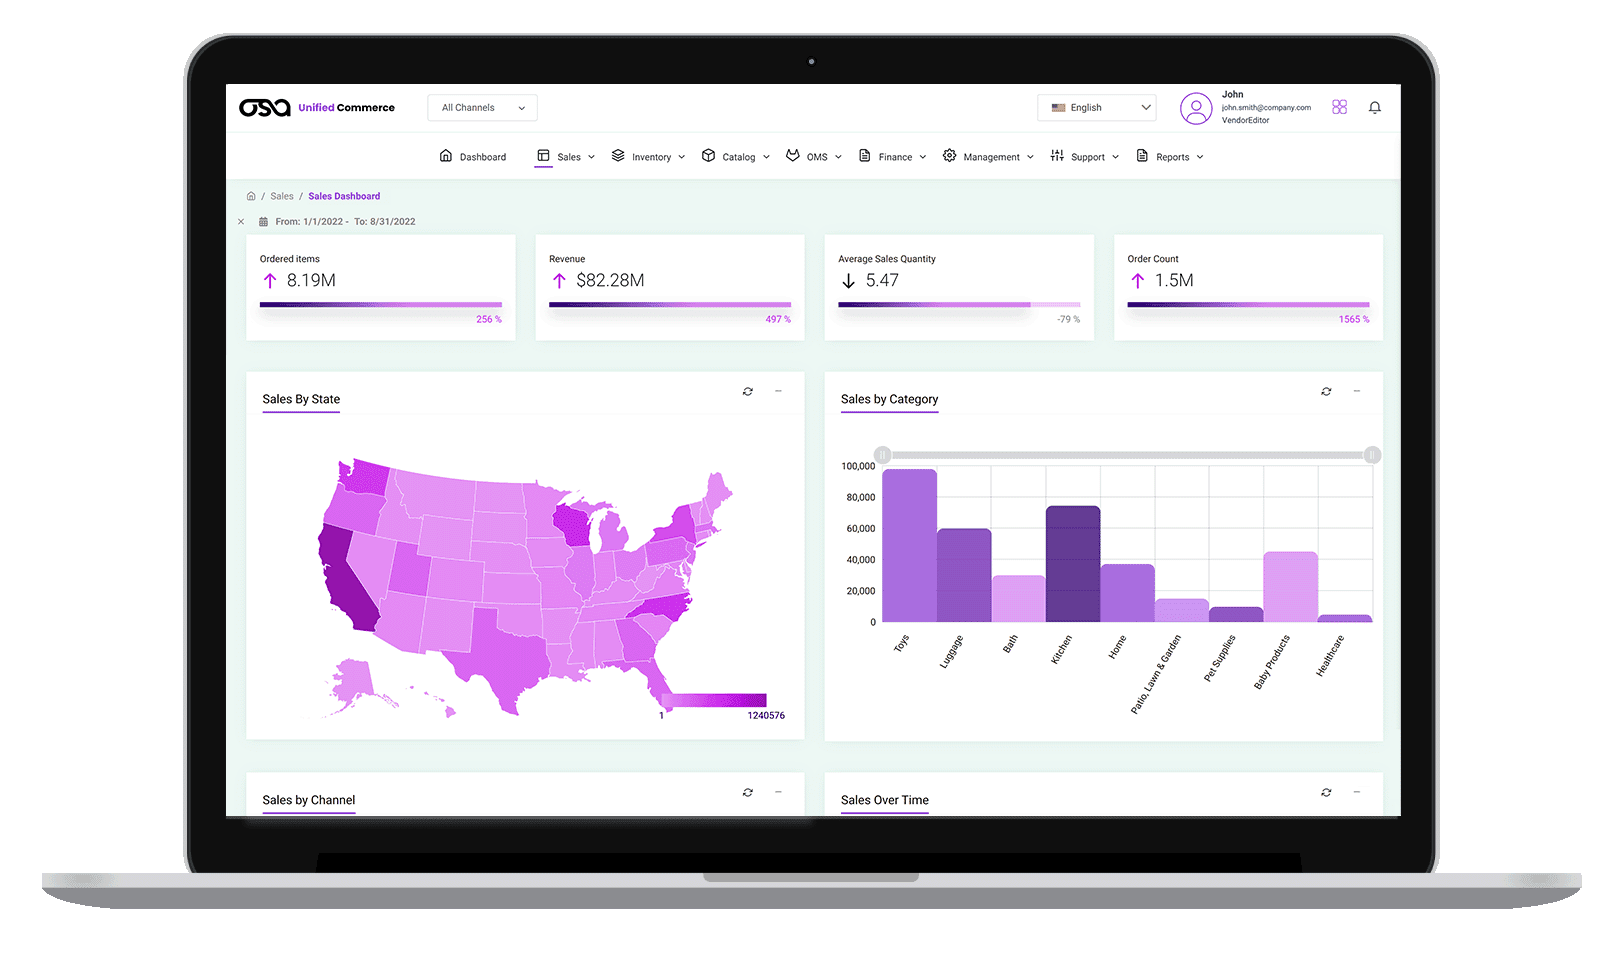 Osa Unified Commerce Platform Dashboard for Brands, Retailers, and 3PLs